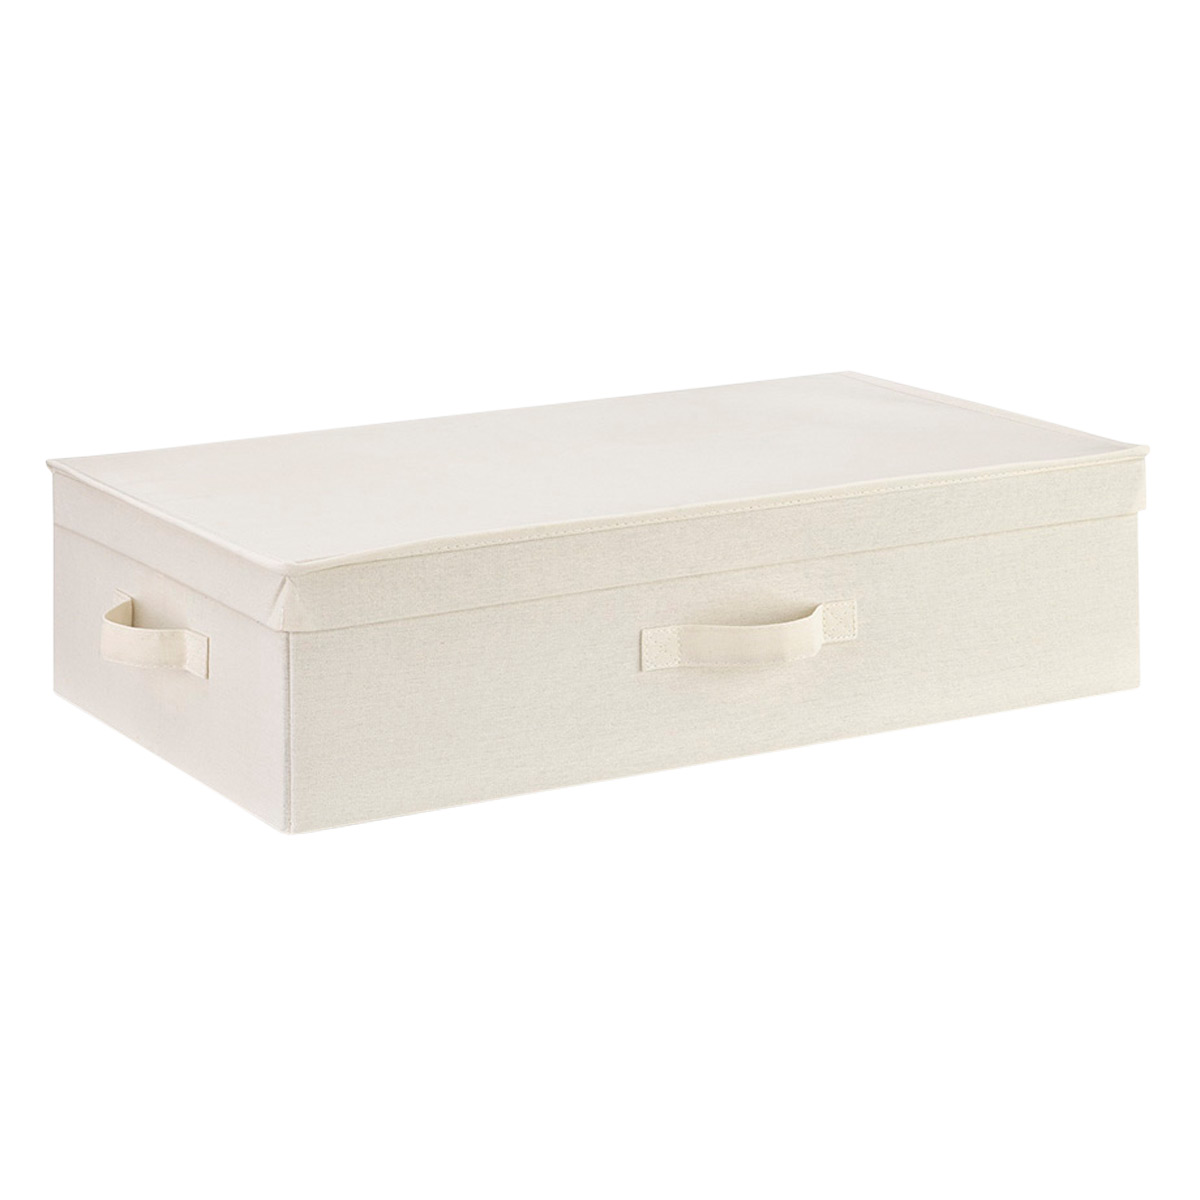 https://www.containerstore.com/catalogimages/469812/10084635-canvas-storage-underbed-box.jpg